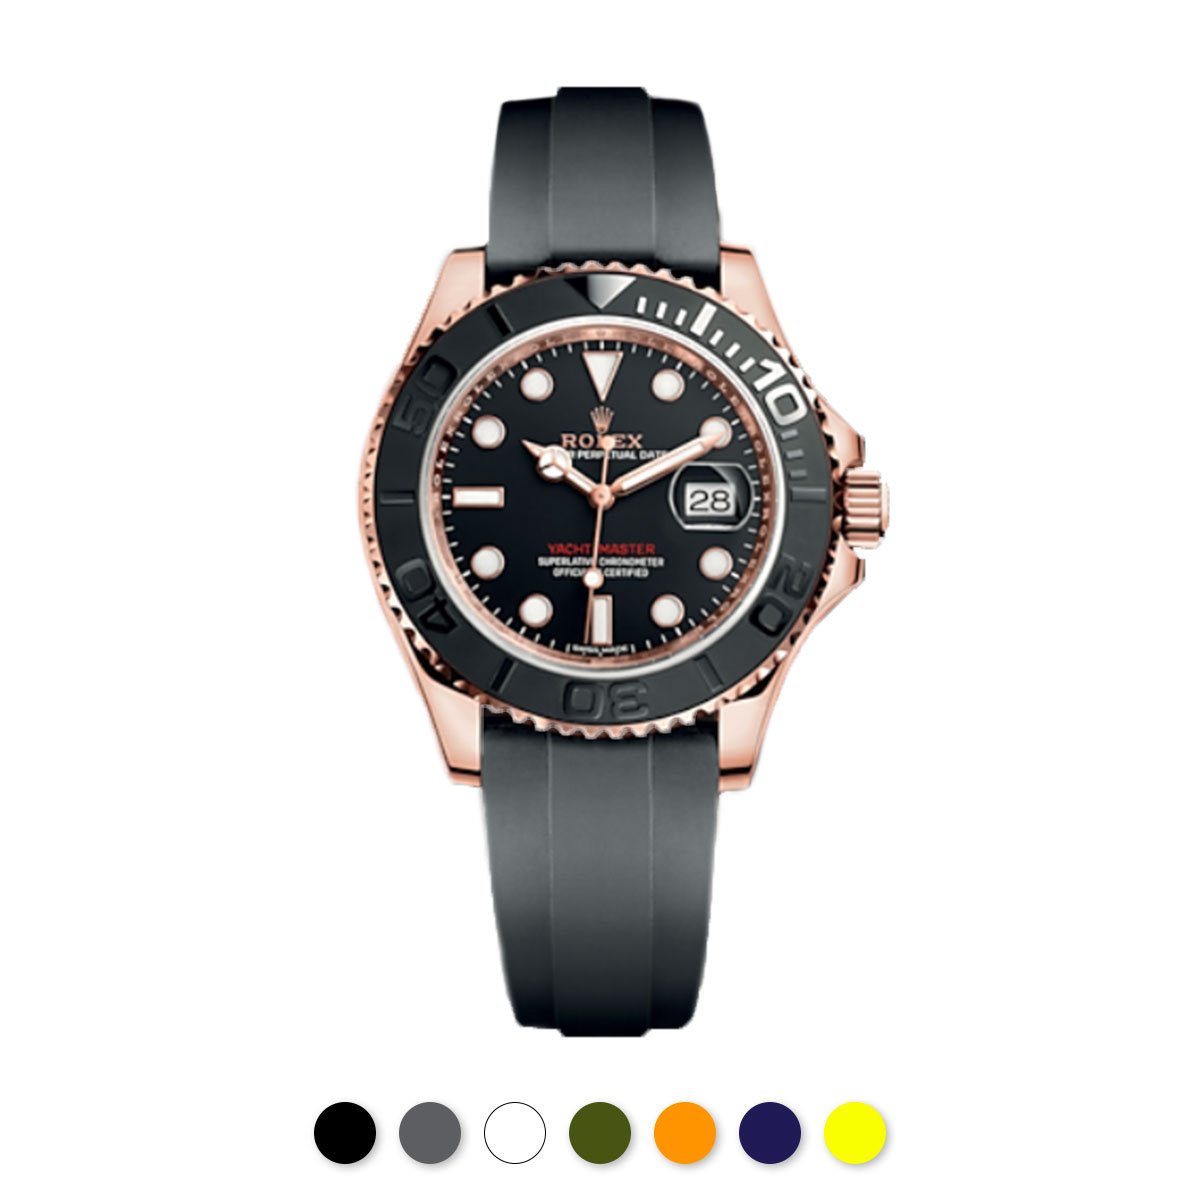 Rubber B strap on Rolex Yacht-Master - nice summer color if summer